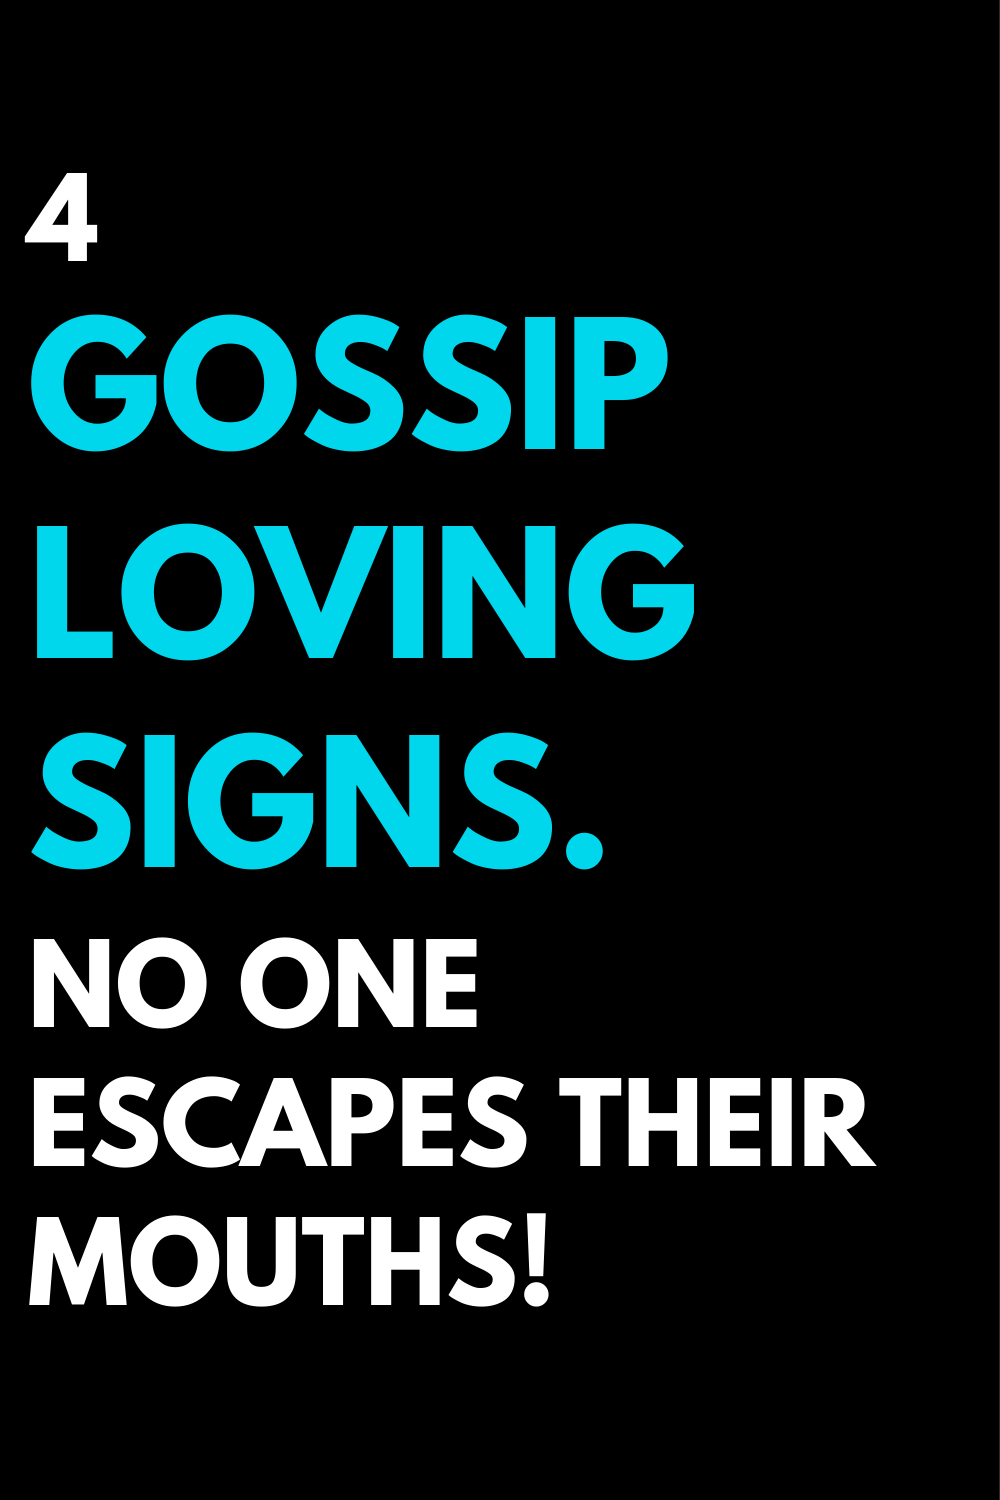 4 gossip-loving signs. No one escapes their mouths!